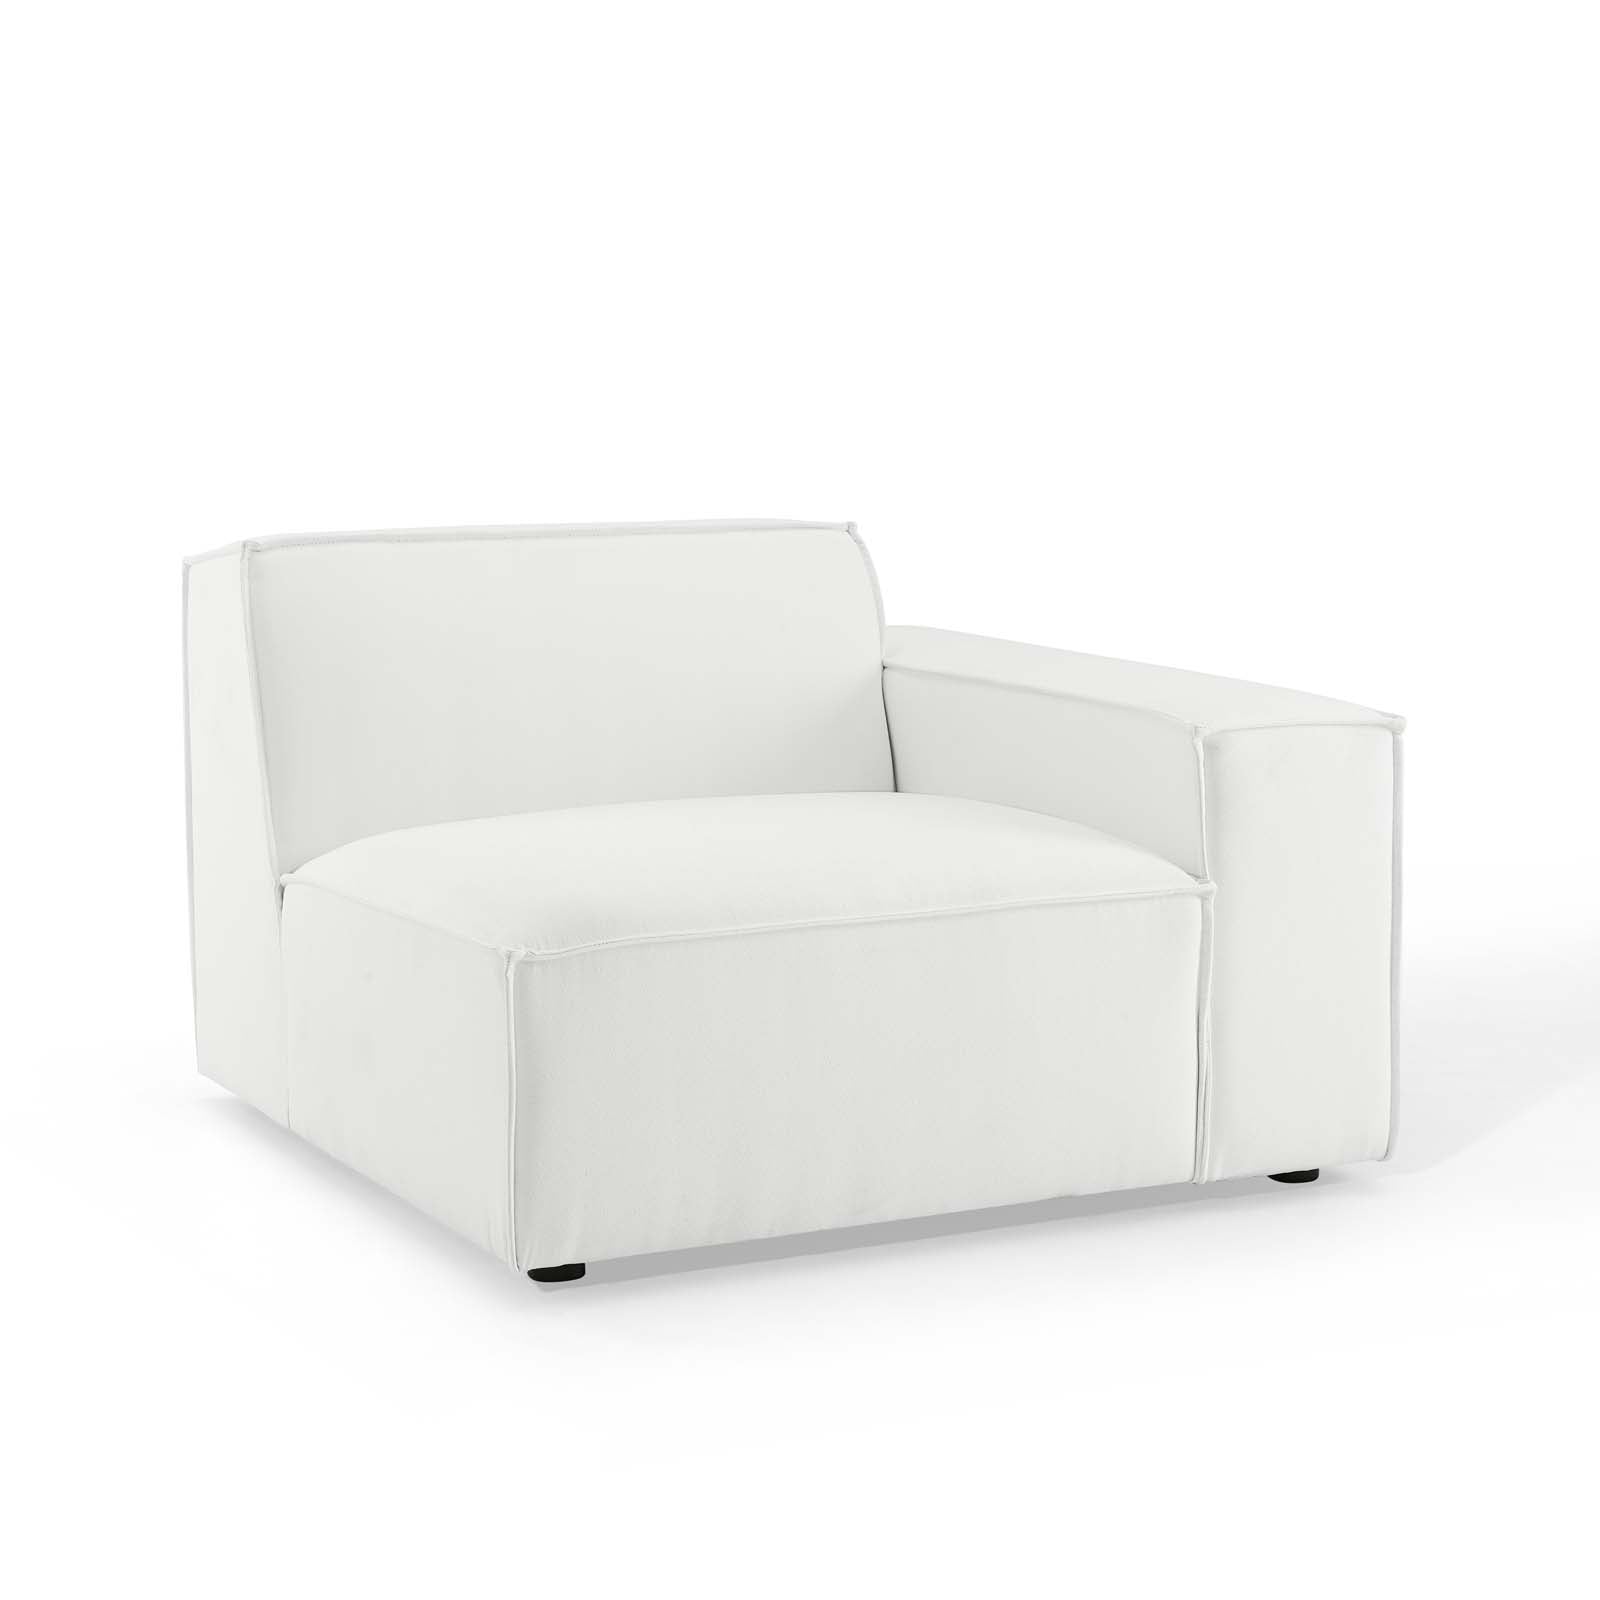 Modway Sectional Sofas - Restore 6-Piece Sectional Sofa White 122"